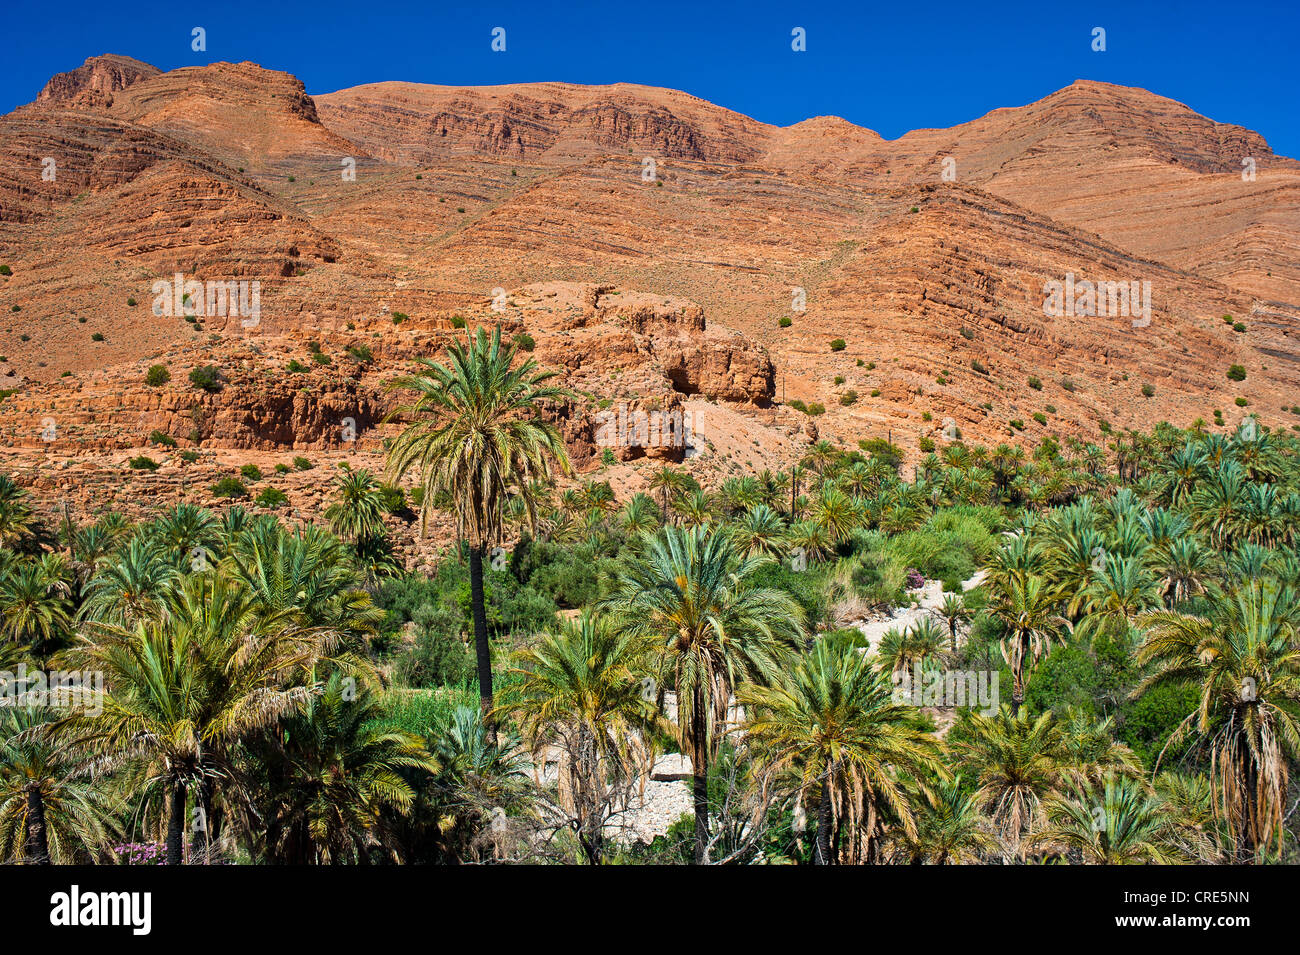 Typical rocky landscape with Date Palms (Phoenix) growing in a dry river bed, Ait Mansour Valley, Anti-Atlas Mountains Stock Photo